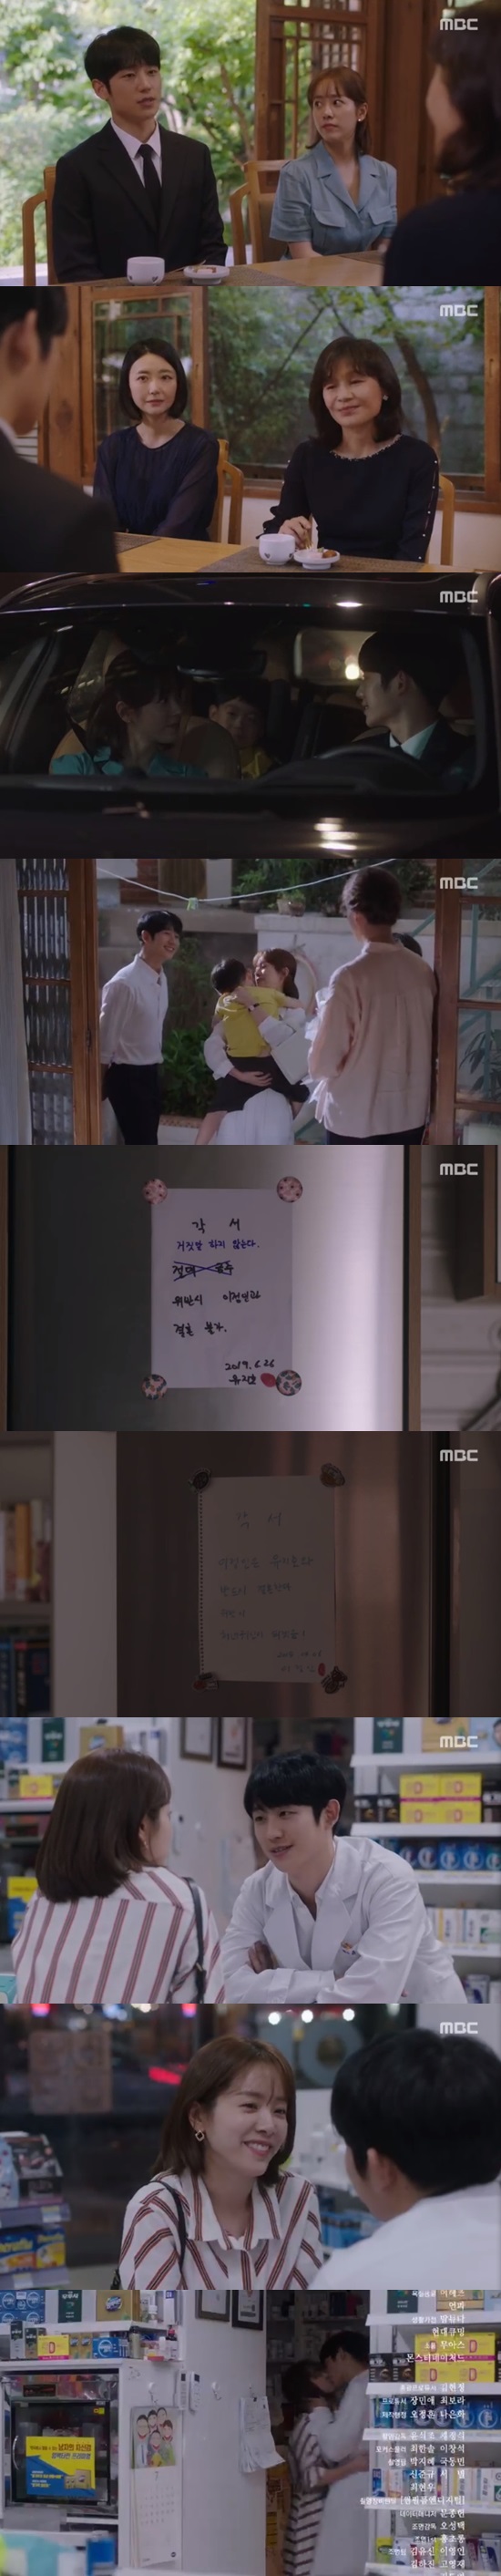 Han Ji-min and Jung Hae-in have earned a good audience with tight-knit Happy Endings as they promised to get married.In the MBC drama Spring Night 31-32 (the last episode/playplay by Kim Eun/director Ahn Pan-seok), which aired on July 11, Lee Jung-in (Han Ji-min) and Yoo Ji-Ho (Jeong Hae-in) met their families, promising to marry.There was a conflict over Yoo Ji-Hos drinking because of his son Jung Eun-woos mother, but soon Lee Jung-in, Yoo Ji-Ho, understood each other.Lee understood the situation of Yoo Ji-Ho, which is more unstable and harder than himself, and received a memorandum from Yoo Ji-Ho that he could not marry if he drank again.Meanwhile, Kwon Ki-seok (Kim Jun-han) framed Lee Jung-ins mother, Shin Hyung-sun (Gil Hae-yeon), saying that Yoo Ji-Ho is poor in quality.Shin said he would meet Yoo Ji-Ho to Lee Jung-in, and Yoo Ji-Ho took his son Jung Eun-woo to the spot.Shin Hyung-sun and Seo-yool Lee (Lim Sung-eon) Lee Jae-in (Ju Min-kyung) welcomed Yoo Eun-woo, who first met.On the spot, Yoo Ji-Ho said, Jung Eun-woo believes only me, but it can not collapse.Jung In has only believed in one person, but I have to protect it no matter what. Lee said, My women cry well, and Shin said, Father has a long way to go. Lee said, Father will wait as long as he can.Ill be happy again, with Ji Ho next to me, and with all the comfort and comfort, Ill be happy again.Jung Eun-woo said, Are you married to Miss Faather?So is the teacher going to be a mother now? Lee Jung-in replied, Yes, the teacher will be Jung Eun-woo mother. Yoo Ji-Ho promised, I will do well, and Lee Jung-in said, No, we will do well.Lee Jung-in then greeted Lee Jung-in at the house of Yoo Ji-Ho, and Yoo Ji-Hos parents Yoo Nam-soo (O Man-seok) and Ko Sook-hee (Kim Jung-young) welcomed Lee Jung-in.Lee Jung-in also spoke of his love for Yoo Ji-Ho in front of Yoo Ji-Ho parents like Yoo Ji-Ho.That night, Lee had made a mistake of sleeping in the room of Jung Eun-woo, and this time he received a memorandum that Yoo Ji-Ho must marry.Kwon Ki-seok urged his father, Kwon Young-guk (Kim Chang-wan), to promise to become a director of the foundation after his retirement from Lee Jung-ins father, Lee Tae-hak (Song Seung-hwan), and Kwon Young-guk did not accept it.Kwon Young-guk told his son that he had done enough to say, You did enough, and Kwon Ki-seok gave up and sent a text message to Lee Jung-in saying, Im sorry.Nam Si-hoon (Lee Mu-saeng) stamped the divorce papers with Seo-yool Lee, and Kwon Ki-seok hinted at a new love by meeting with the university professor, a daughter of a member of parliament who wanted to meet her father.Lee Jung-in and Yoo Ji-Ho ended up in a way that they were affectionate in search of a drug that was sober in the pharmacy as they met for the first time.Although he did not get married and did not get permission from Lee Tae-hak, Lee Jung-in, Yoo Ji-Ho, made a closed Happy Endings that made him guess that he would marry with the blessing of both family members even if it took a while to give up his post.Yoo Gyeong-sang